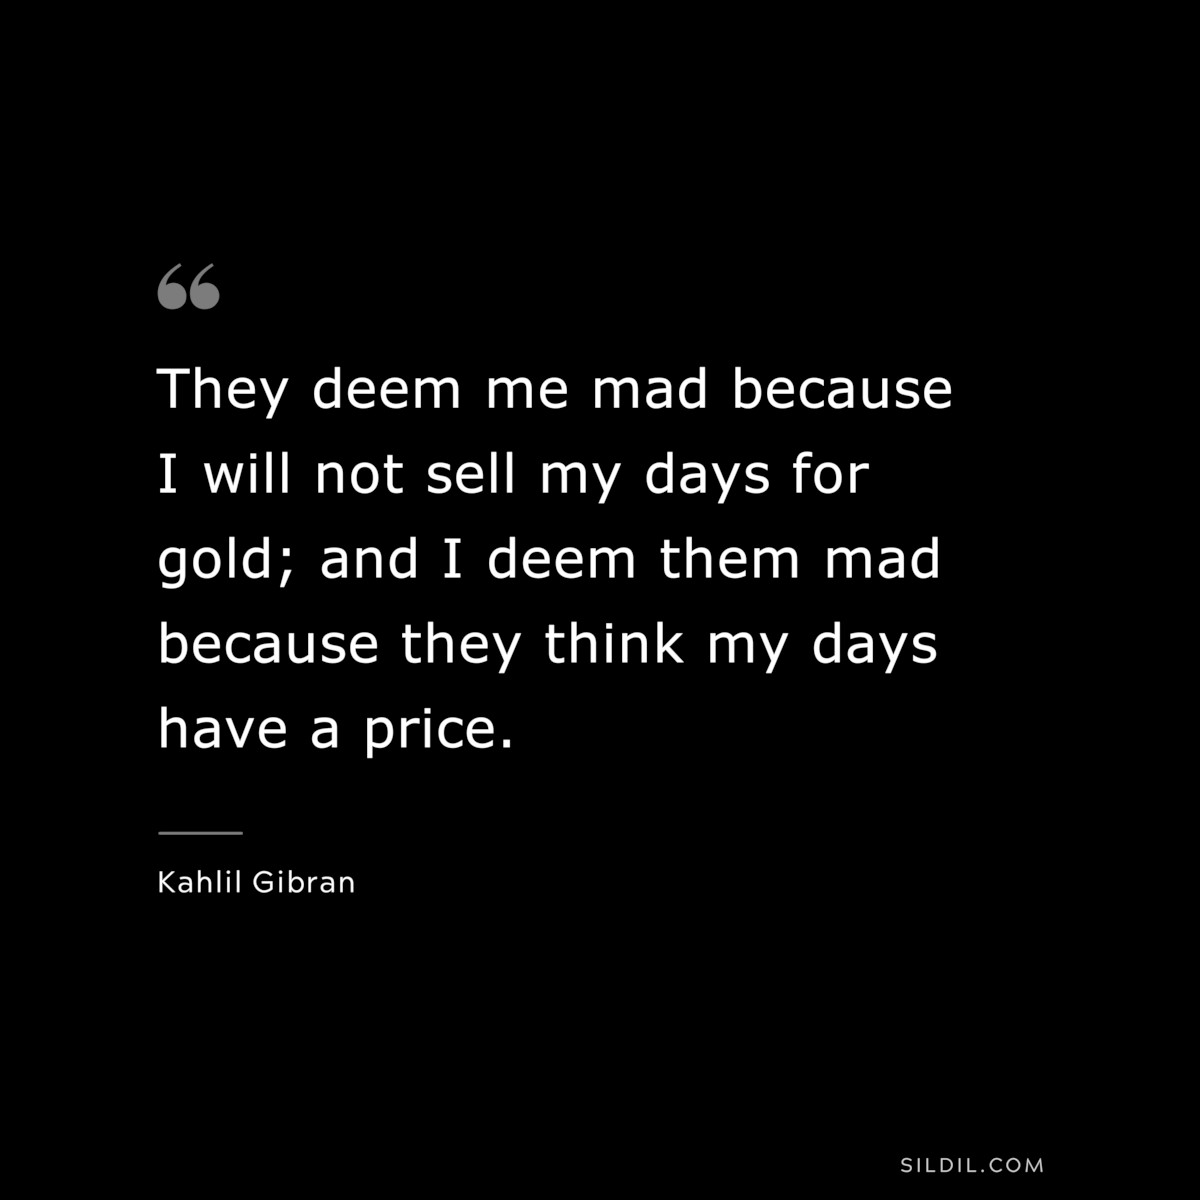 They deem me mad because I will not sell my days for gold; and I deem them mad because they think my days have a price. ― Kahlil Gibran